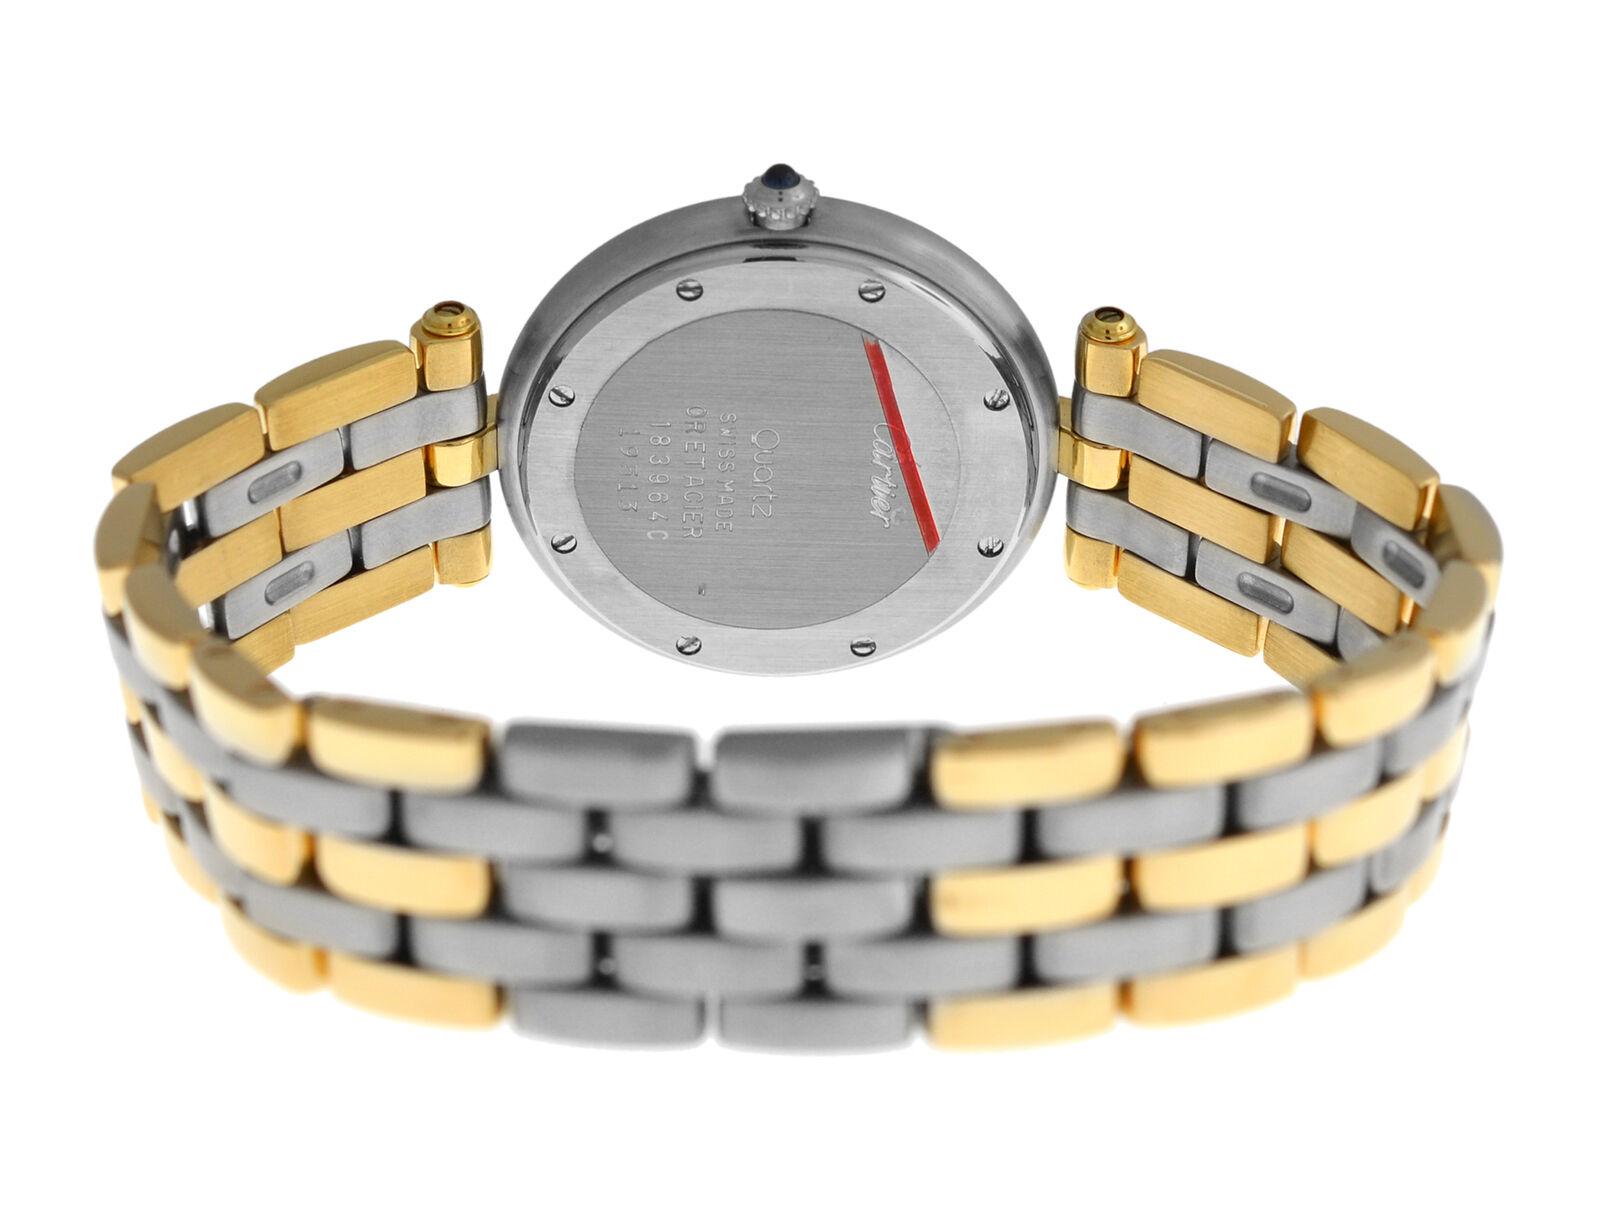 
Brand	Cartier
Model	Panthere Vendome 183964
Gender	Ladies
Condition	Pre-owned
Movement	Swiss Quartz
Case Material	Stainless Steel & 18K Yellow Gold
Bracelet / Strap Material	
Stainless Steel & 18K Yellow Gold

Clasp / Buckle Material	
Stainless